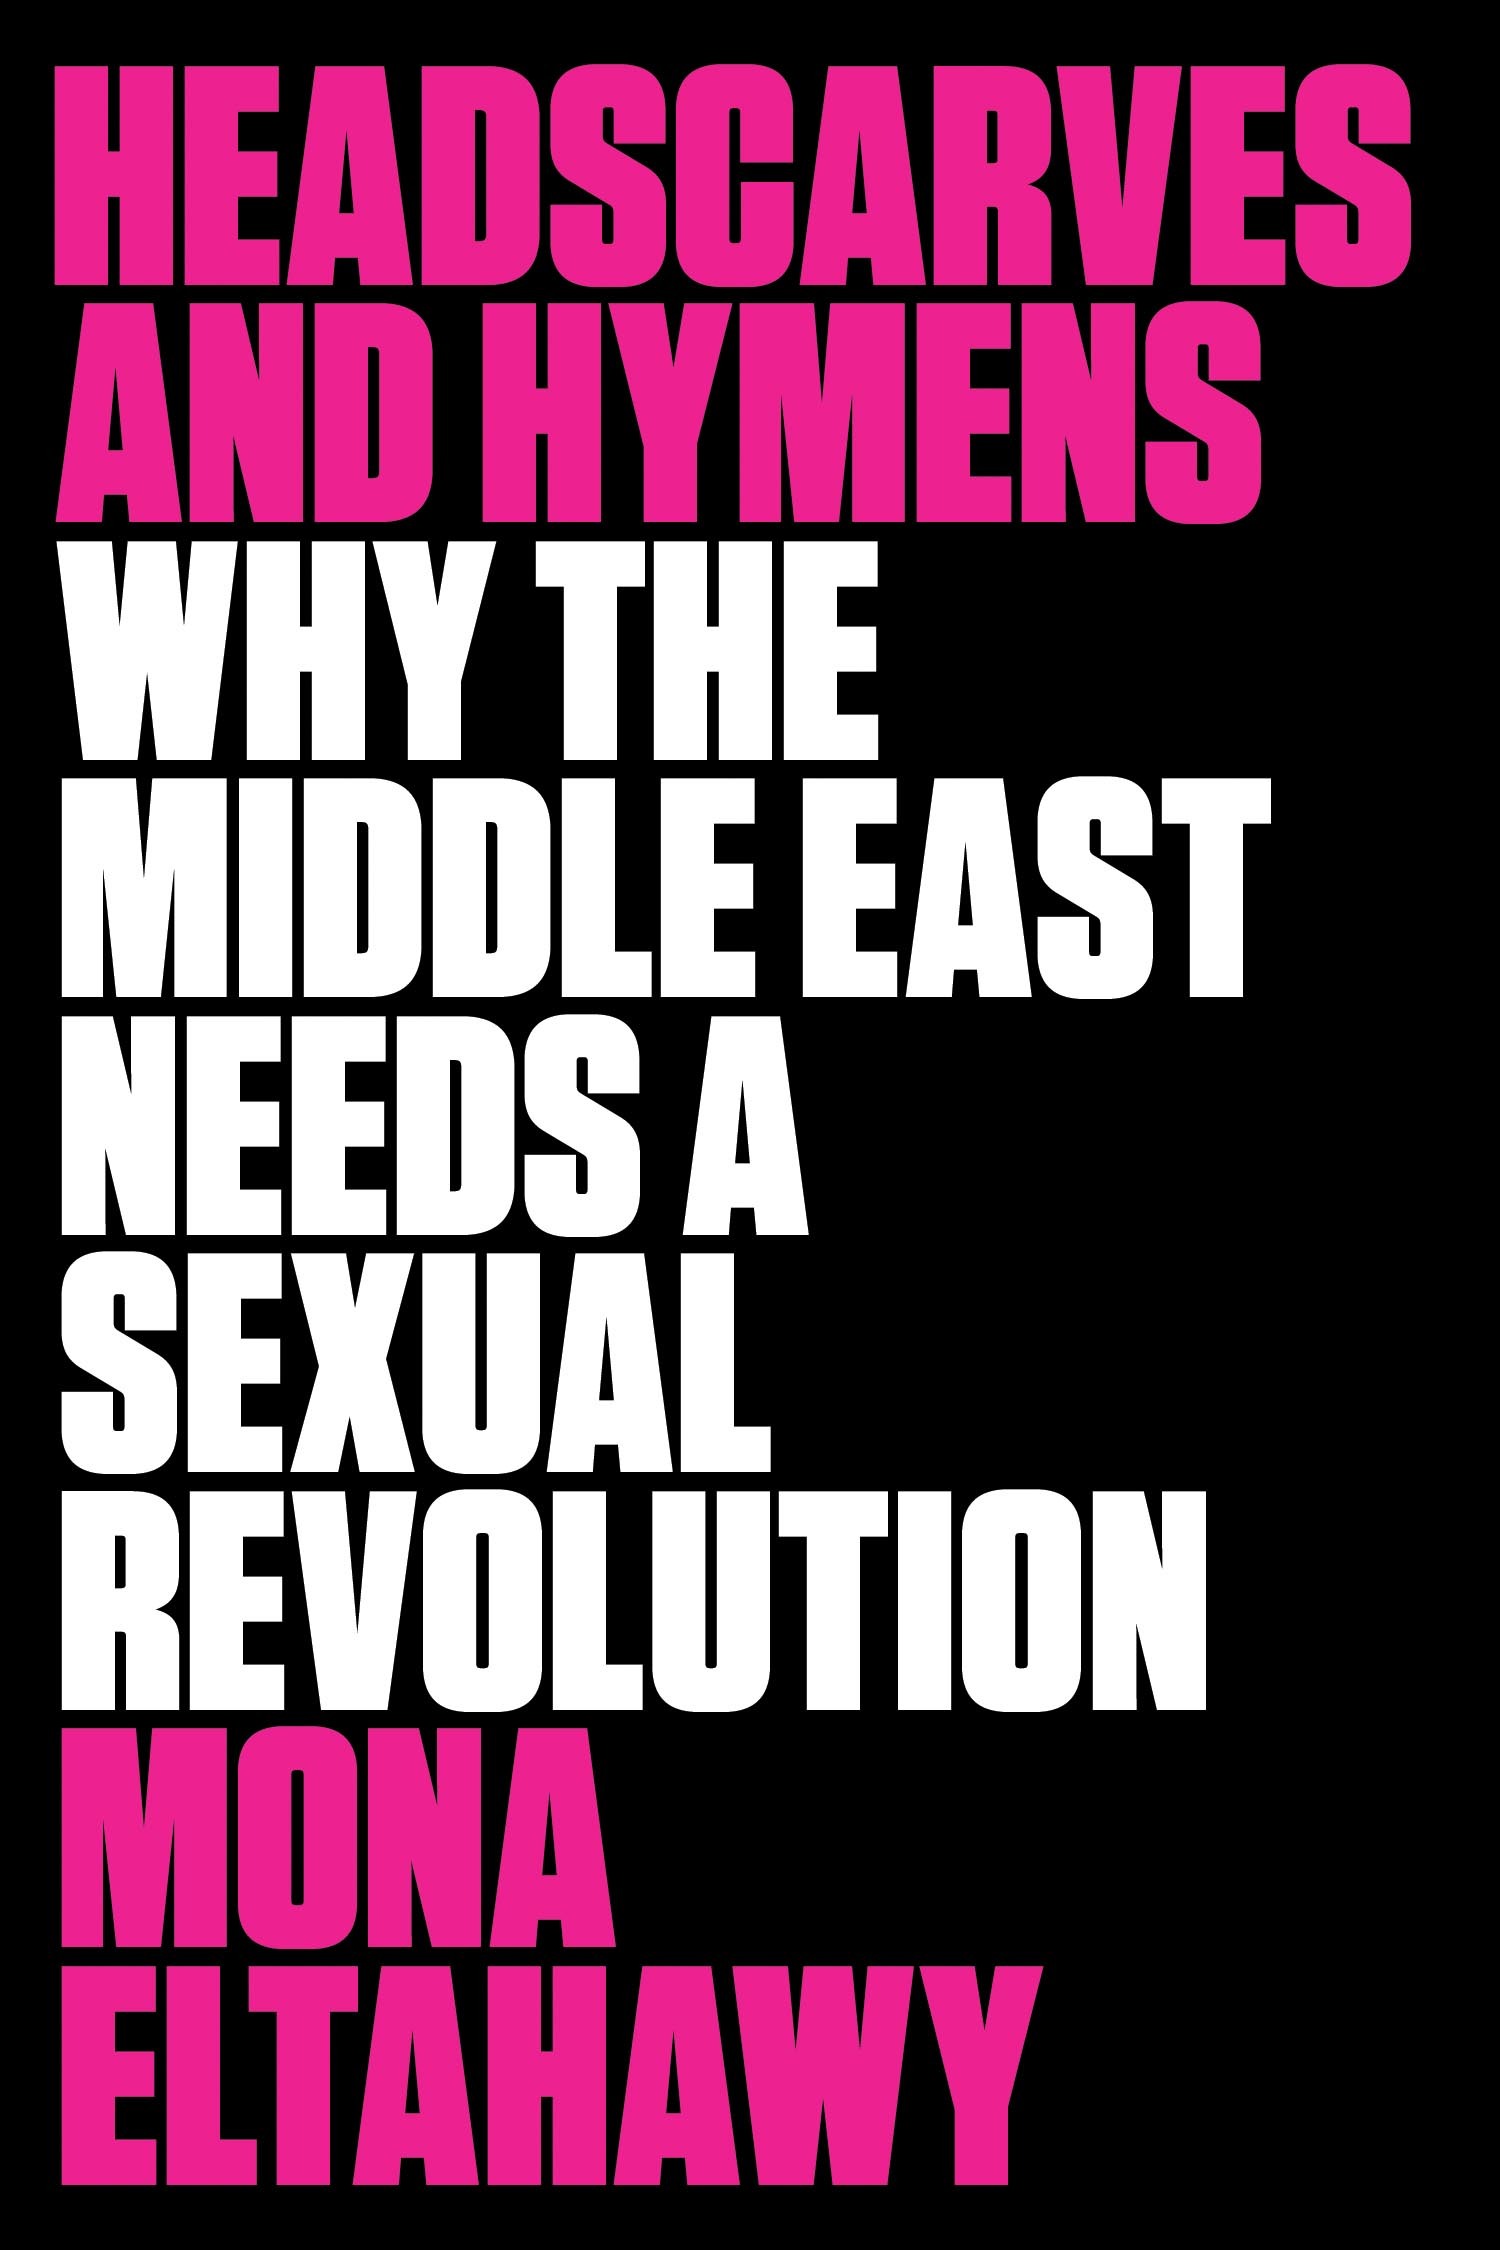 The cover of Mona Eltahawy's book: "Headscarves and Hymens: Why the Middle  East Needs a Sexual Revolution"